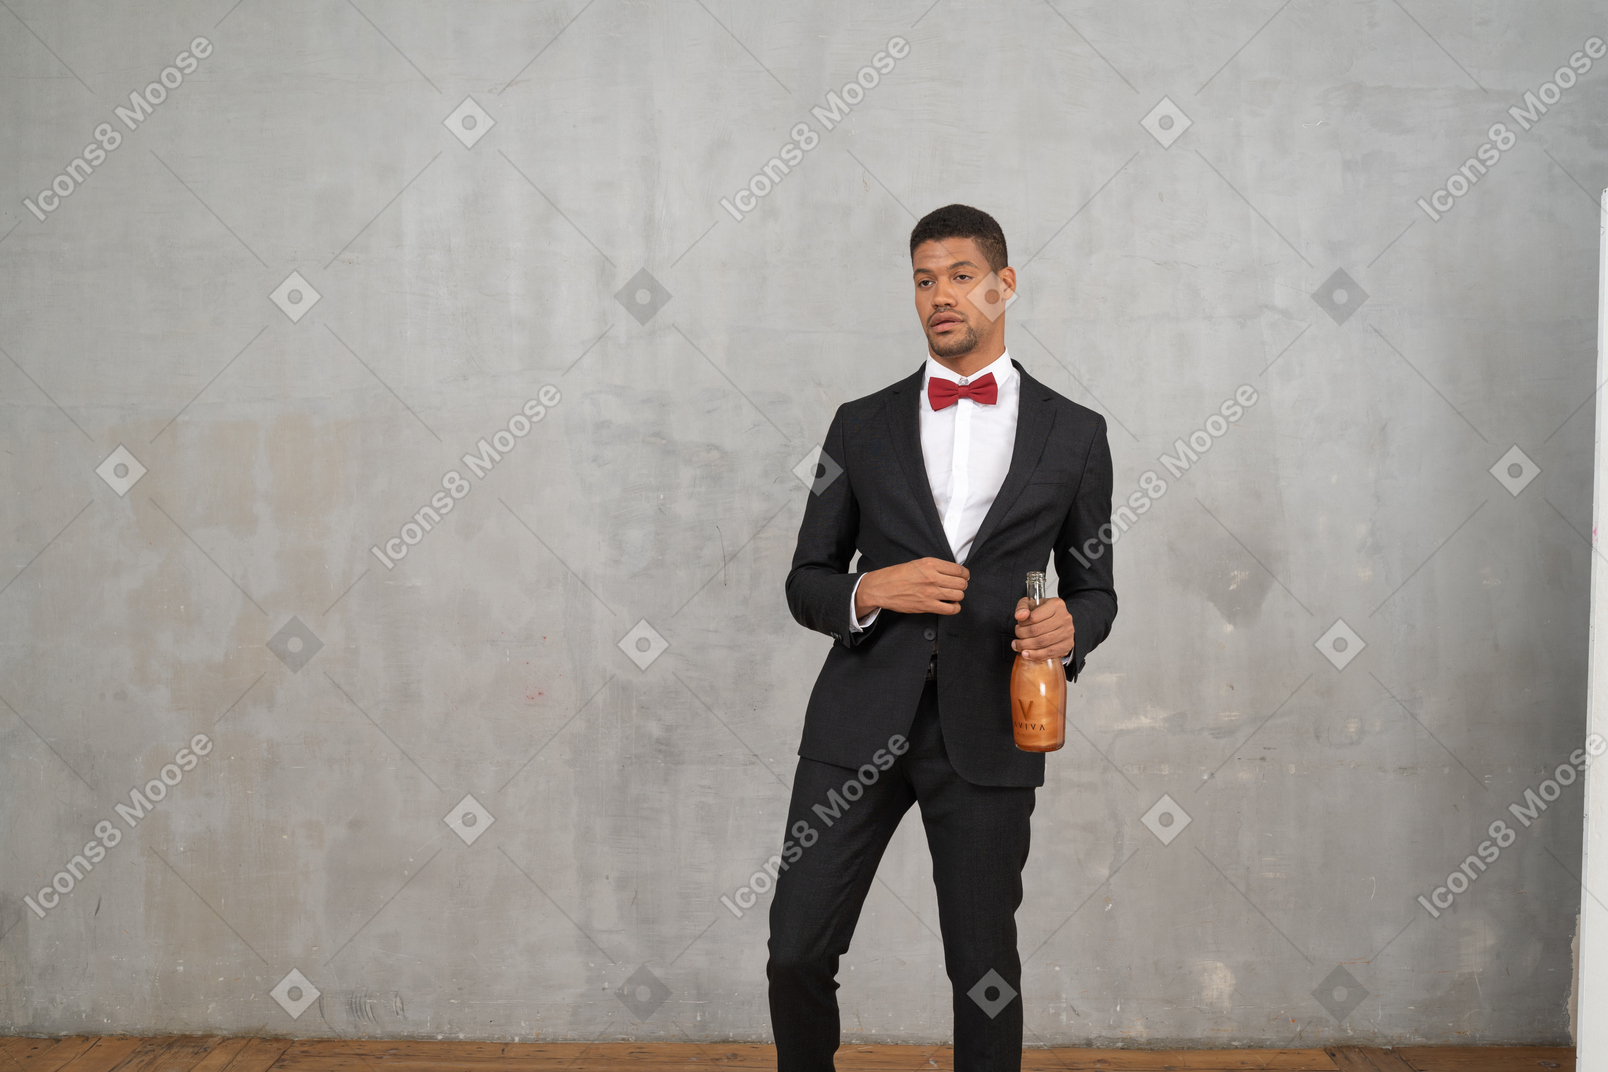 Man in formal wear staggering with a bottle in his hand